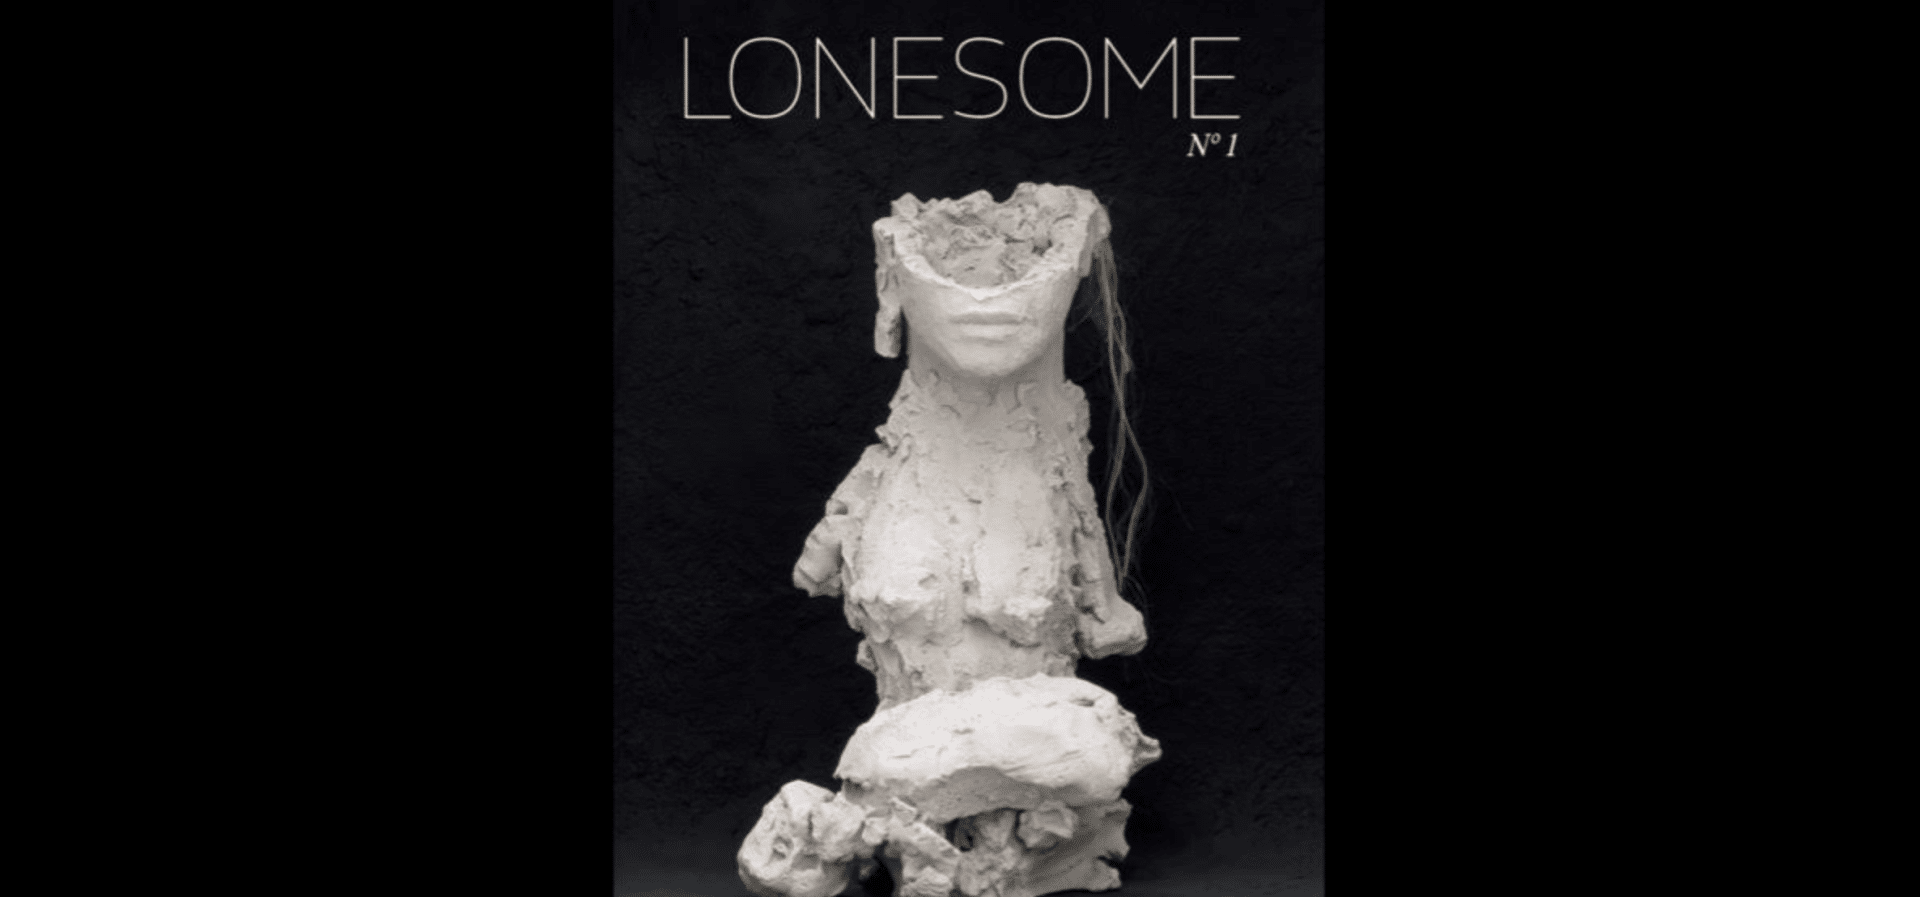 LONESOME N°1 YOU KNOW WHO YOU ARE HOSTED BY MONIQUE ERICKSON